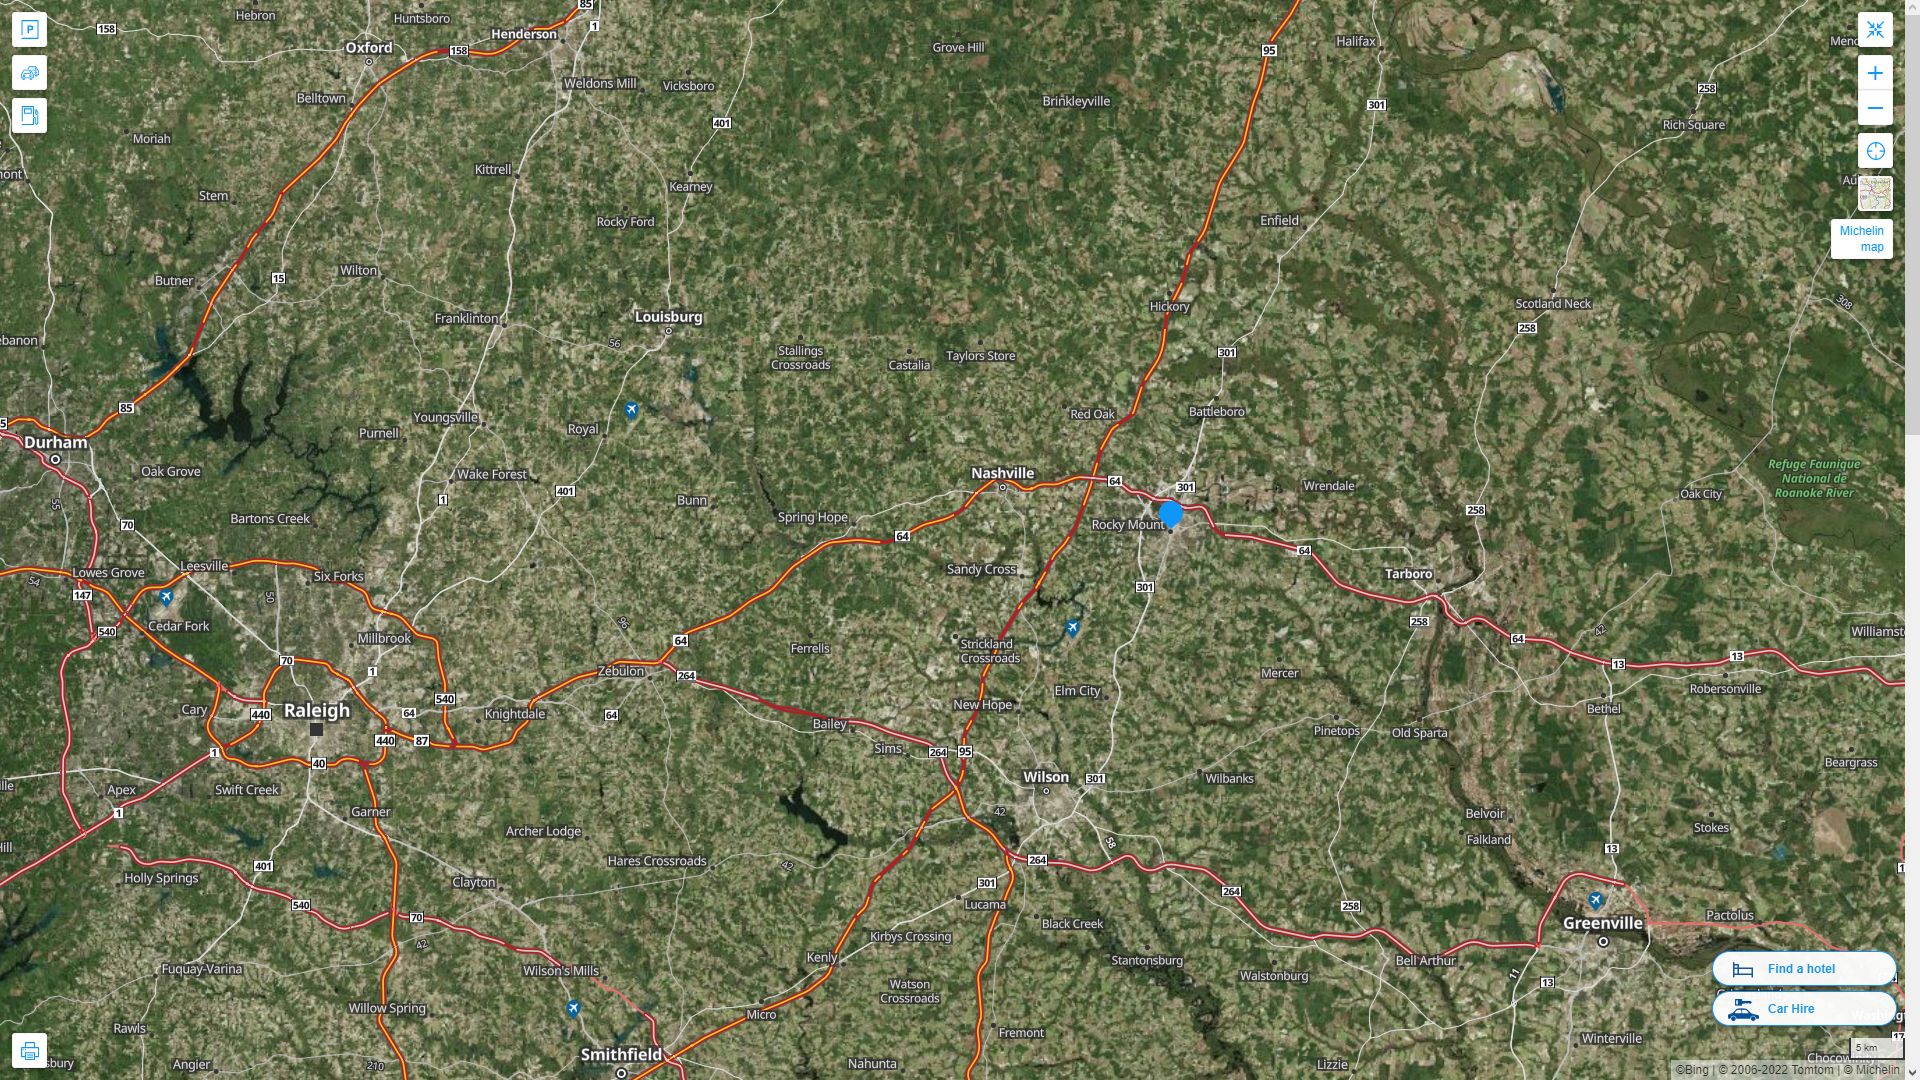 Rocky Mount North Carolina Highway and Road Map with Satellite View